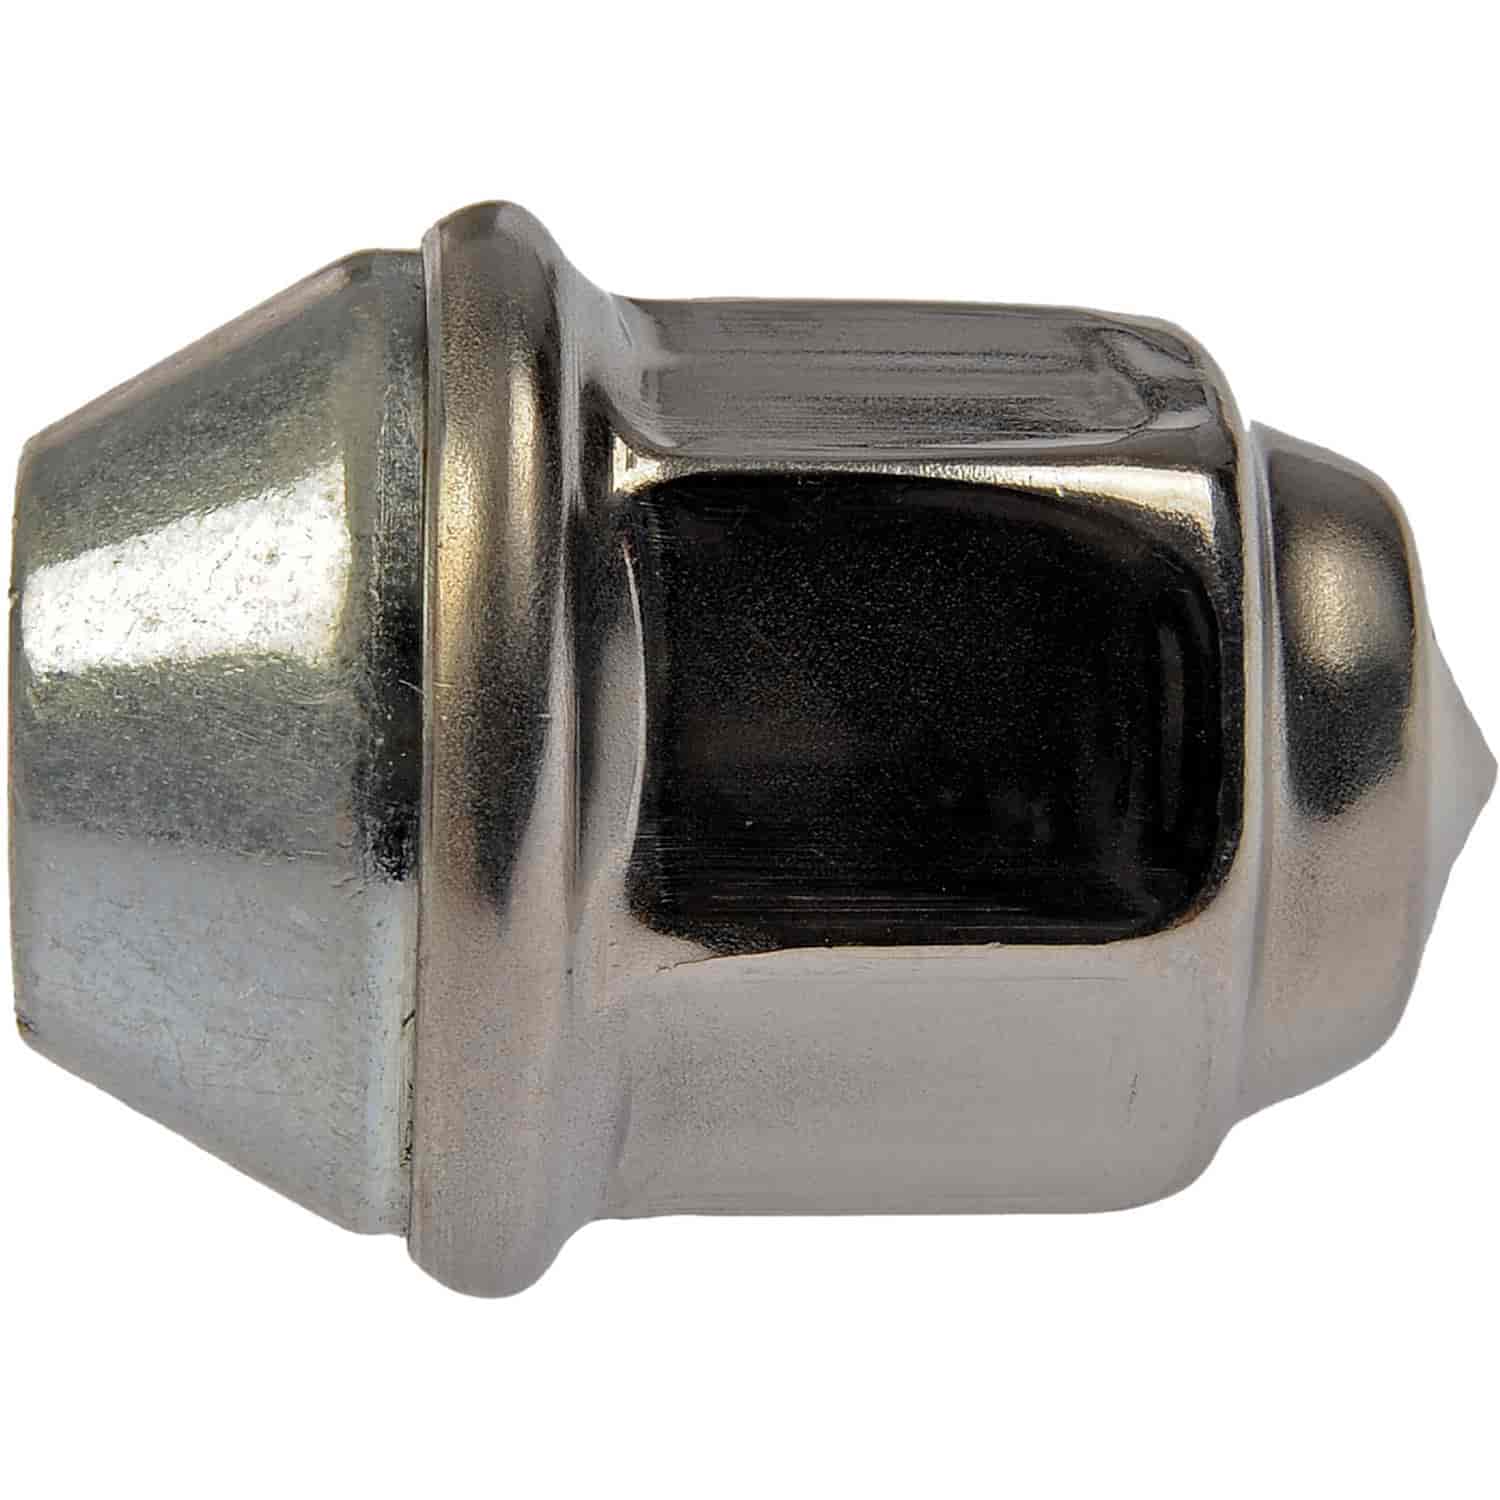 Wheel Nut 1/2-20 Dometop Capped - 13/16 In. Hex 1.5 In. Length